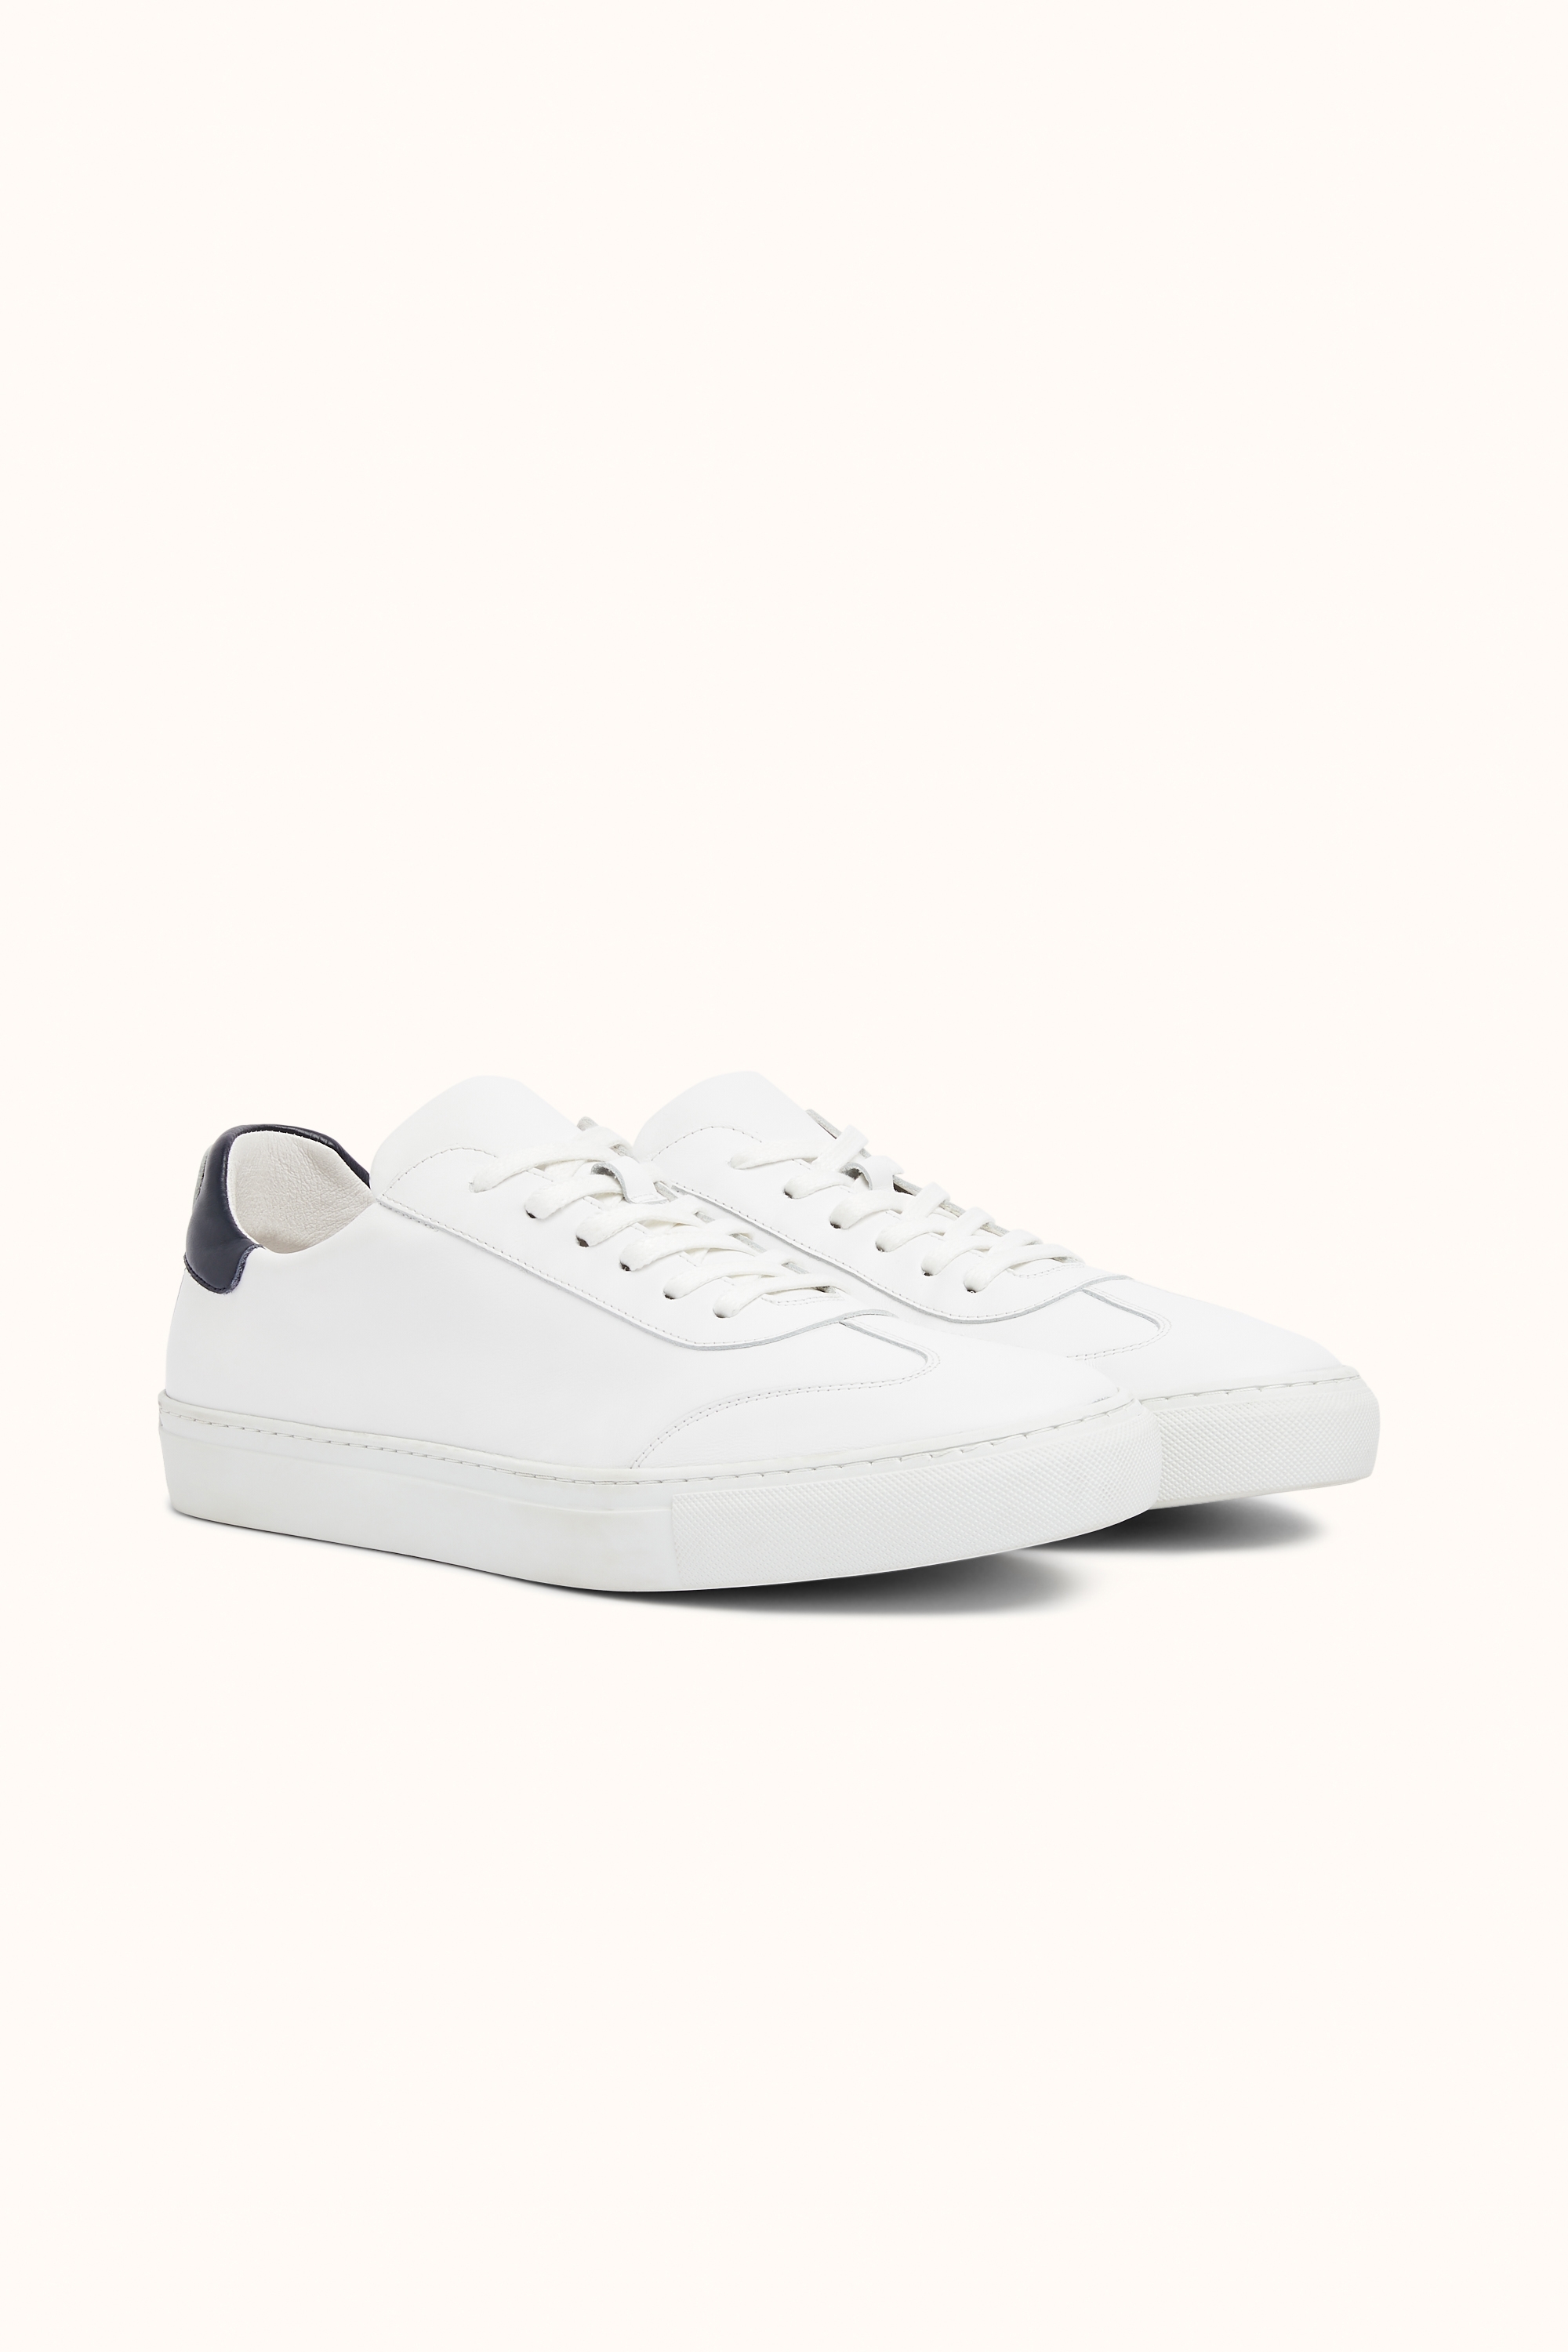 Dalston White Leather Smart Trainers